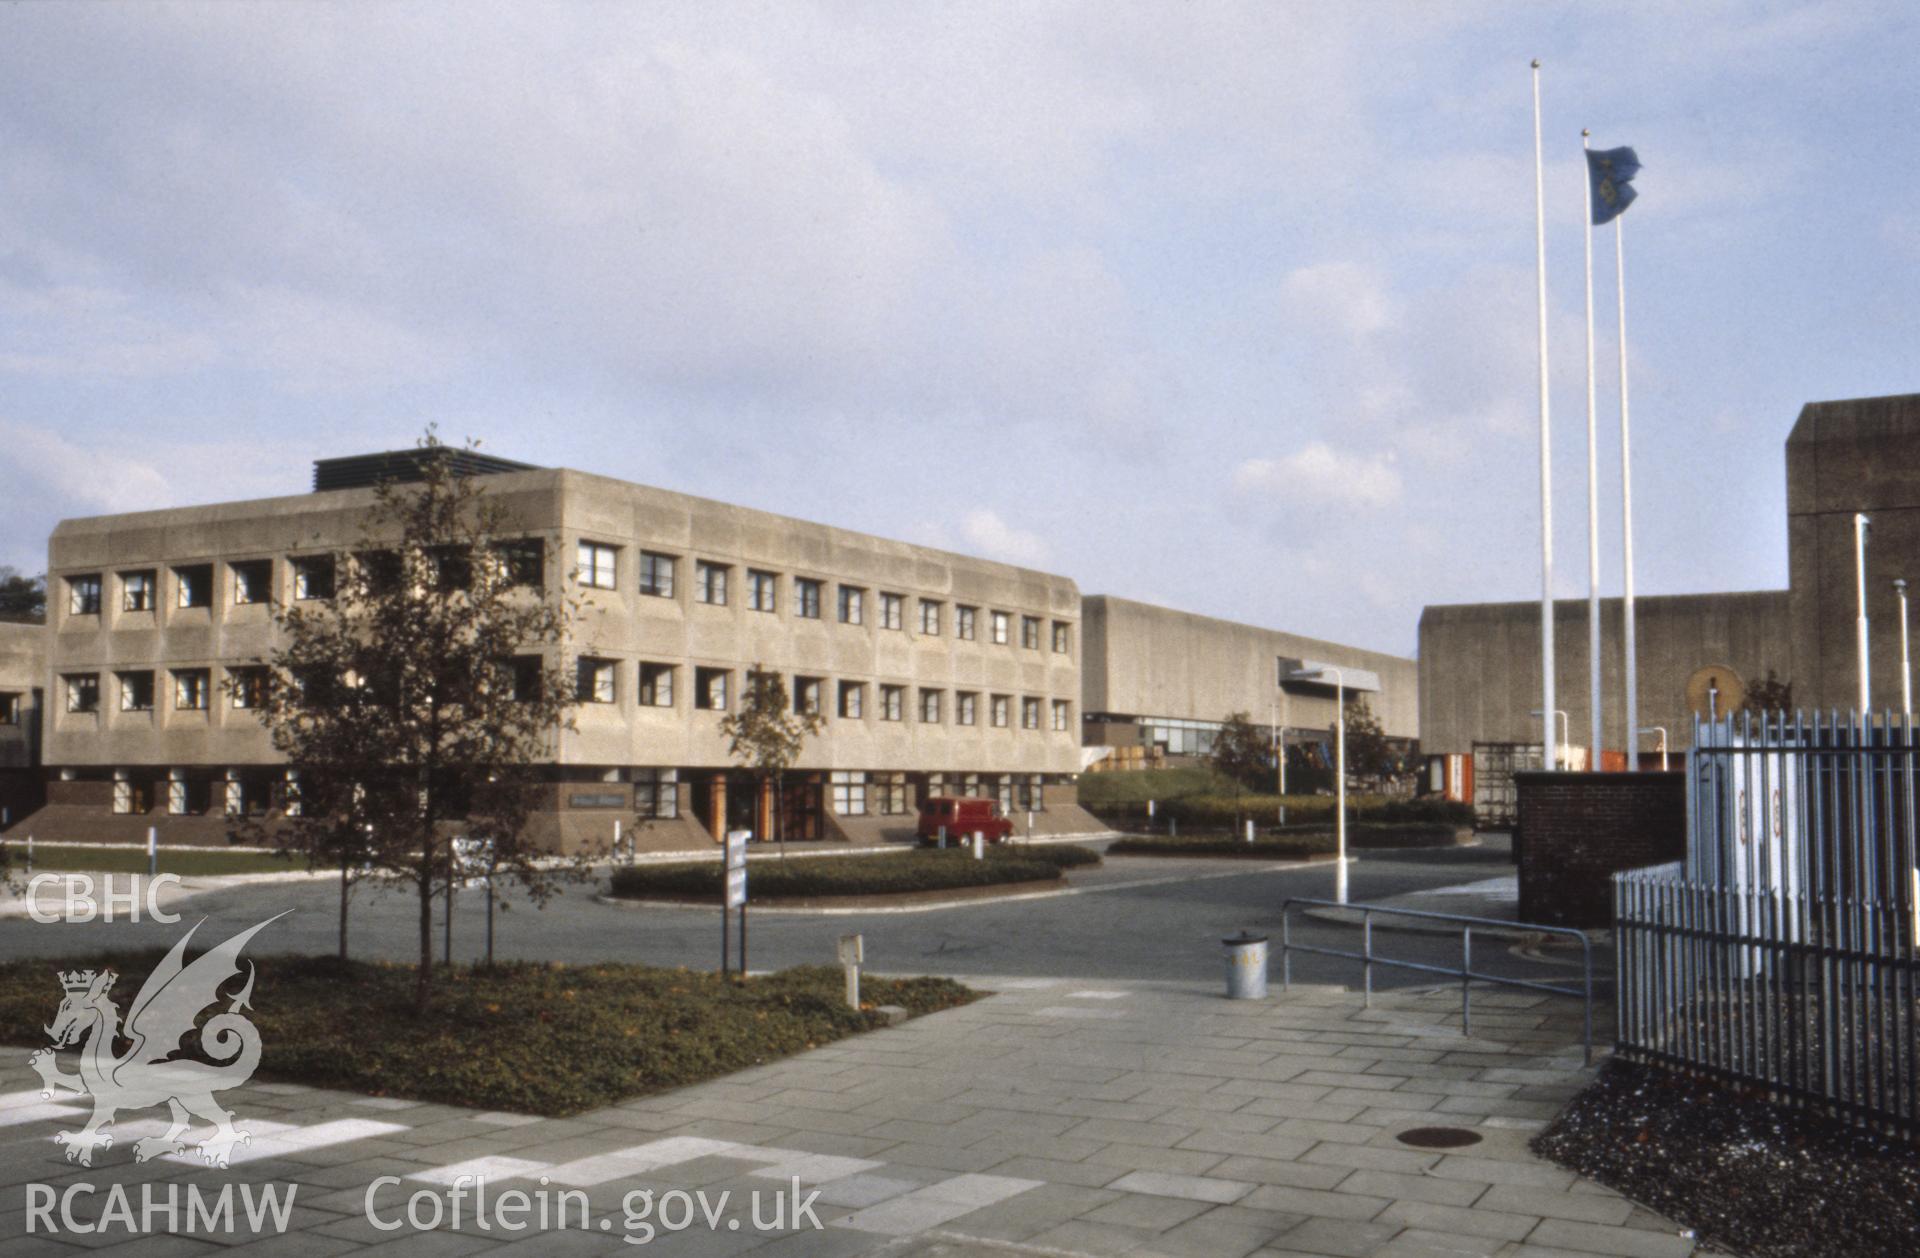 1 colour transparency showing exterior view of the Royal Mint, Llantrisant; collated by the former Central Office of Information.